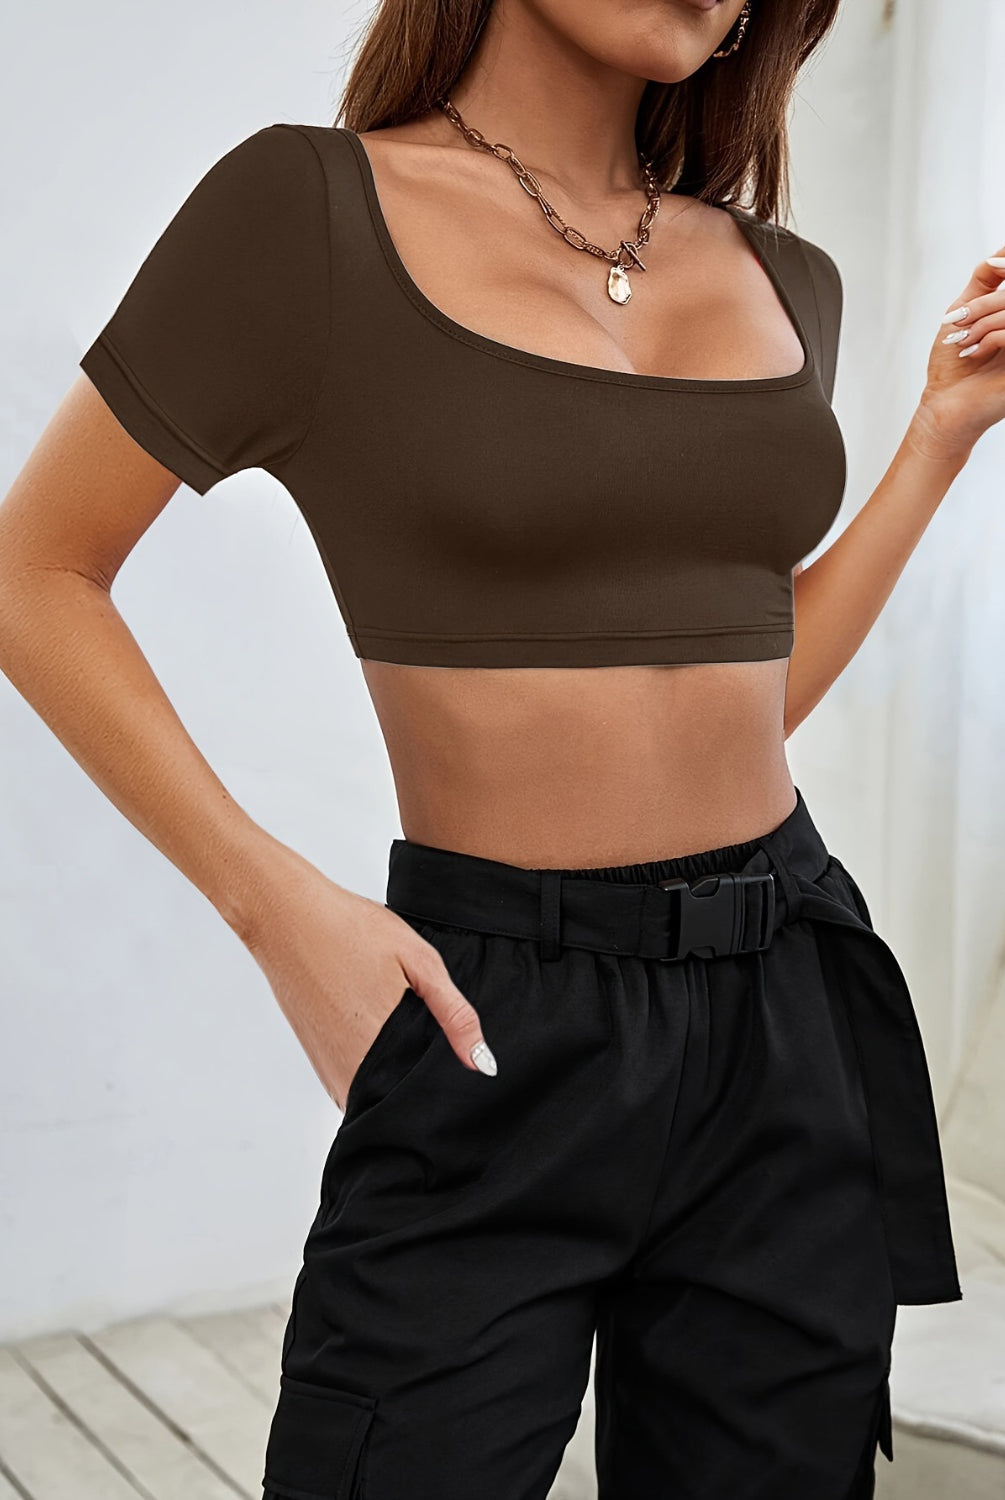 A stylish woman dons a sophisticated black crop top with a square neckline, paired seamlessly with high-waisted trousers for a sleek, urban look.